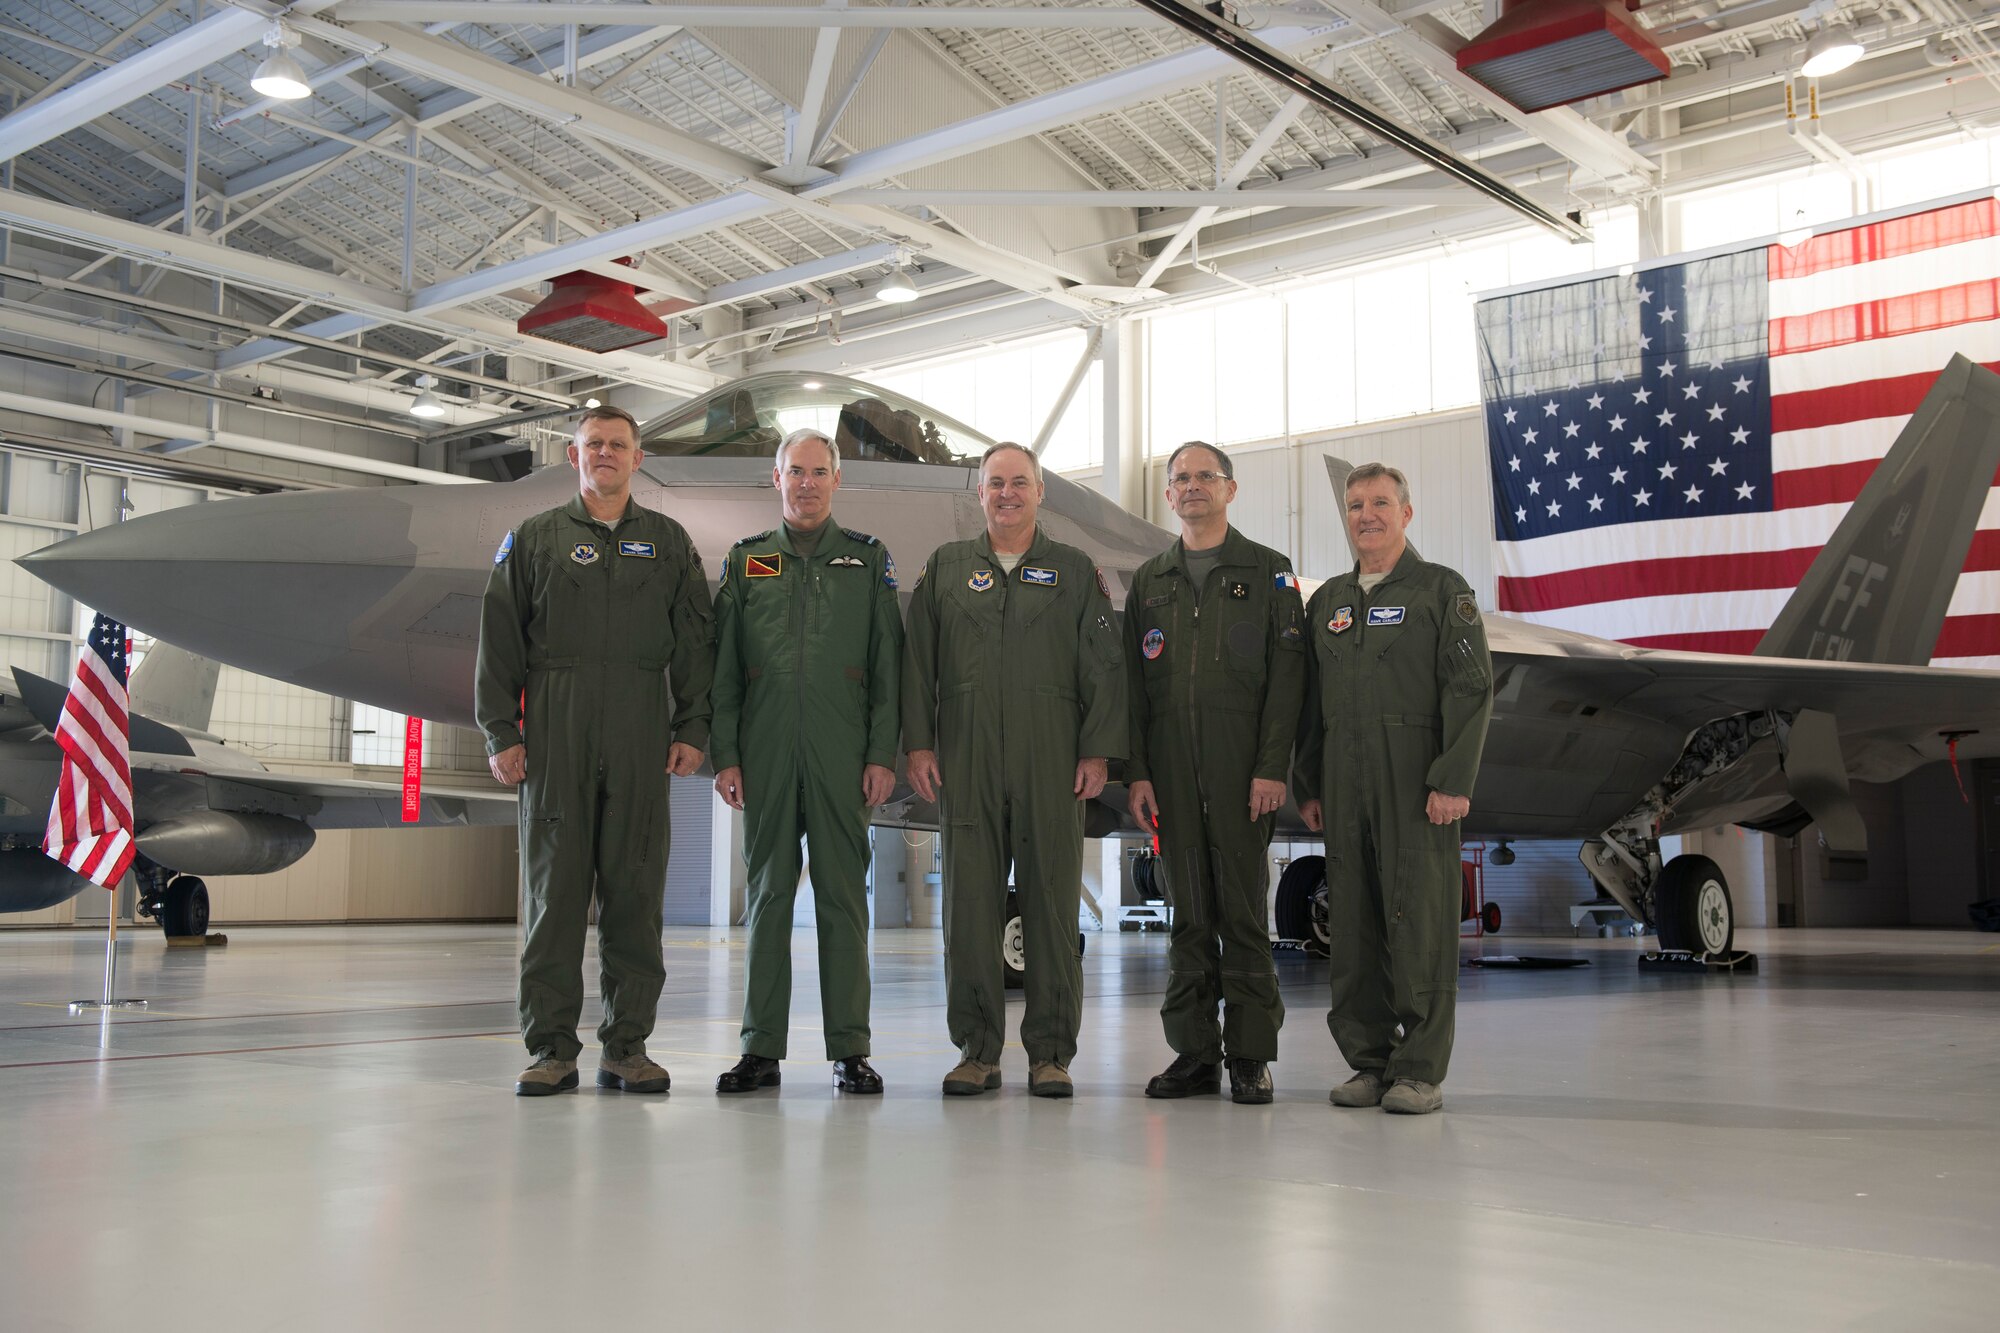 From left, U.S. Air Force Gen. Frank Gorenc, commander of U.S. Air Forces in Europe (USAFE), British Royal Air Force Chief of the Air Staff, Air Chief Marshall Sir Andrew Pulford, Chief of Staff of the U.S. Air Force Gen. Mark A. Welsh III, French air force Deputy Chief of the Air Staff Gen. Antoine Creux, and U.S. Air Force Gen. Hawk Carlisle, commander of Air Combat Command, pose for a photo during the Trilateral Exercise at Langley Air Force Base, Va., Dec. 15, 2015.  The exercise, which aims to give coalition forces an opportunity to hone skills during simulated adversarial scenarios, kicked off Dec. 2, 2015 and is scheduled to conclude Dec. 18, 2015. (U.S. Air Force photo by Tech. Sgt. Katie Gar Ward)